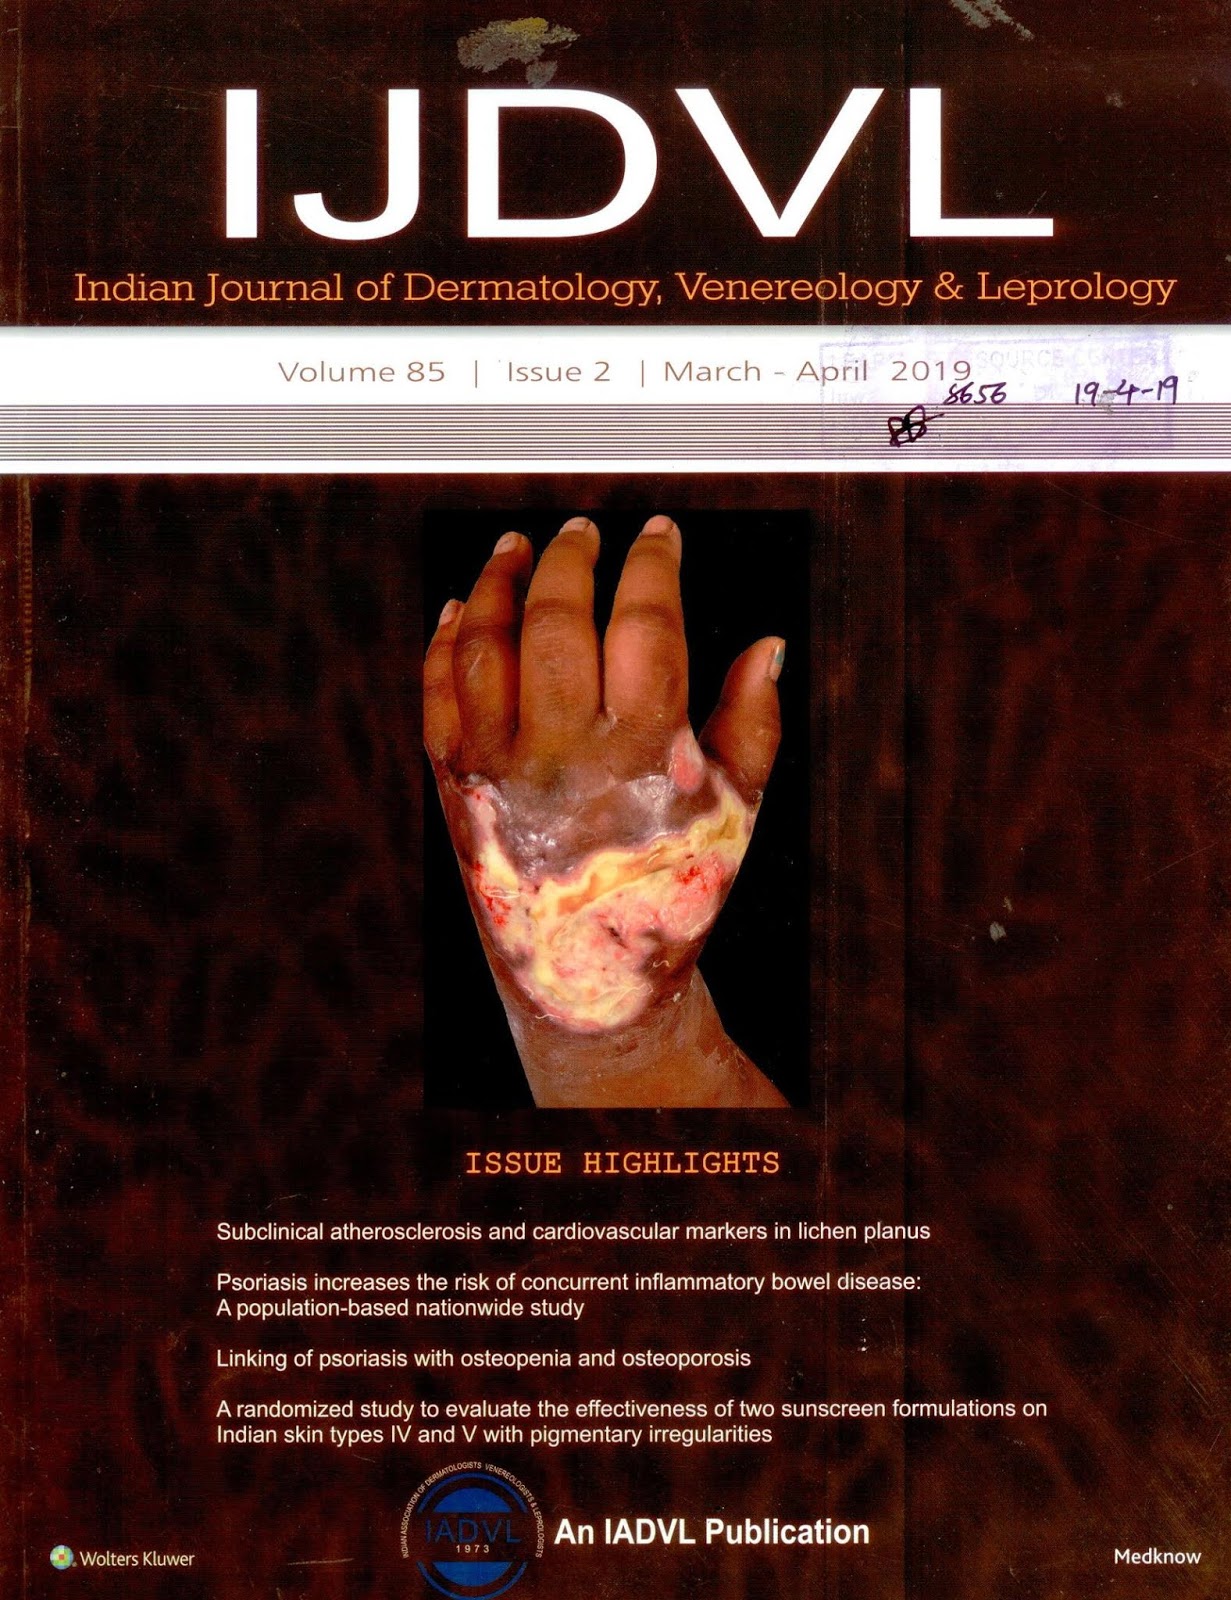 http://www.ijdvl.com/showBackIssue.asp?issn=0378-6323;year=2019;volume=85;issue=2;month=March-April